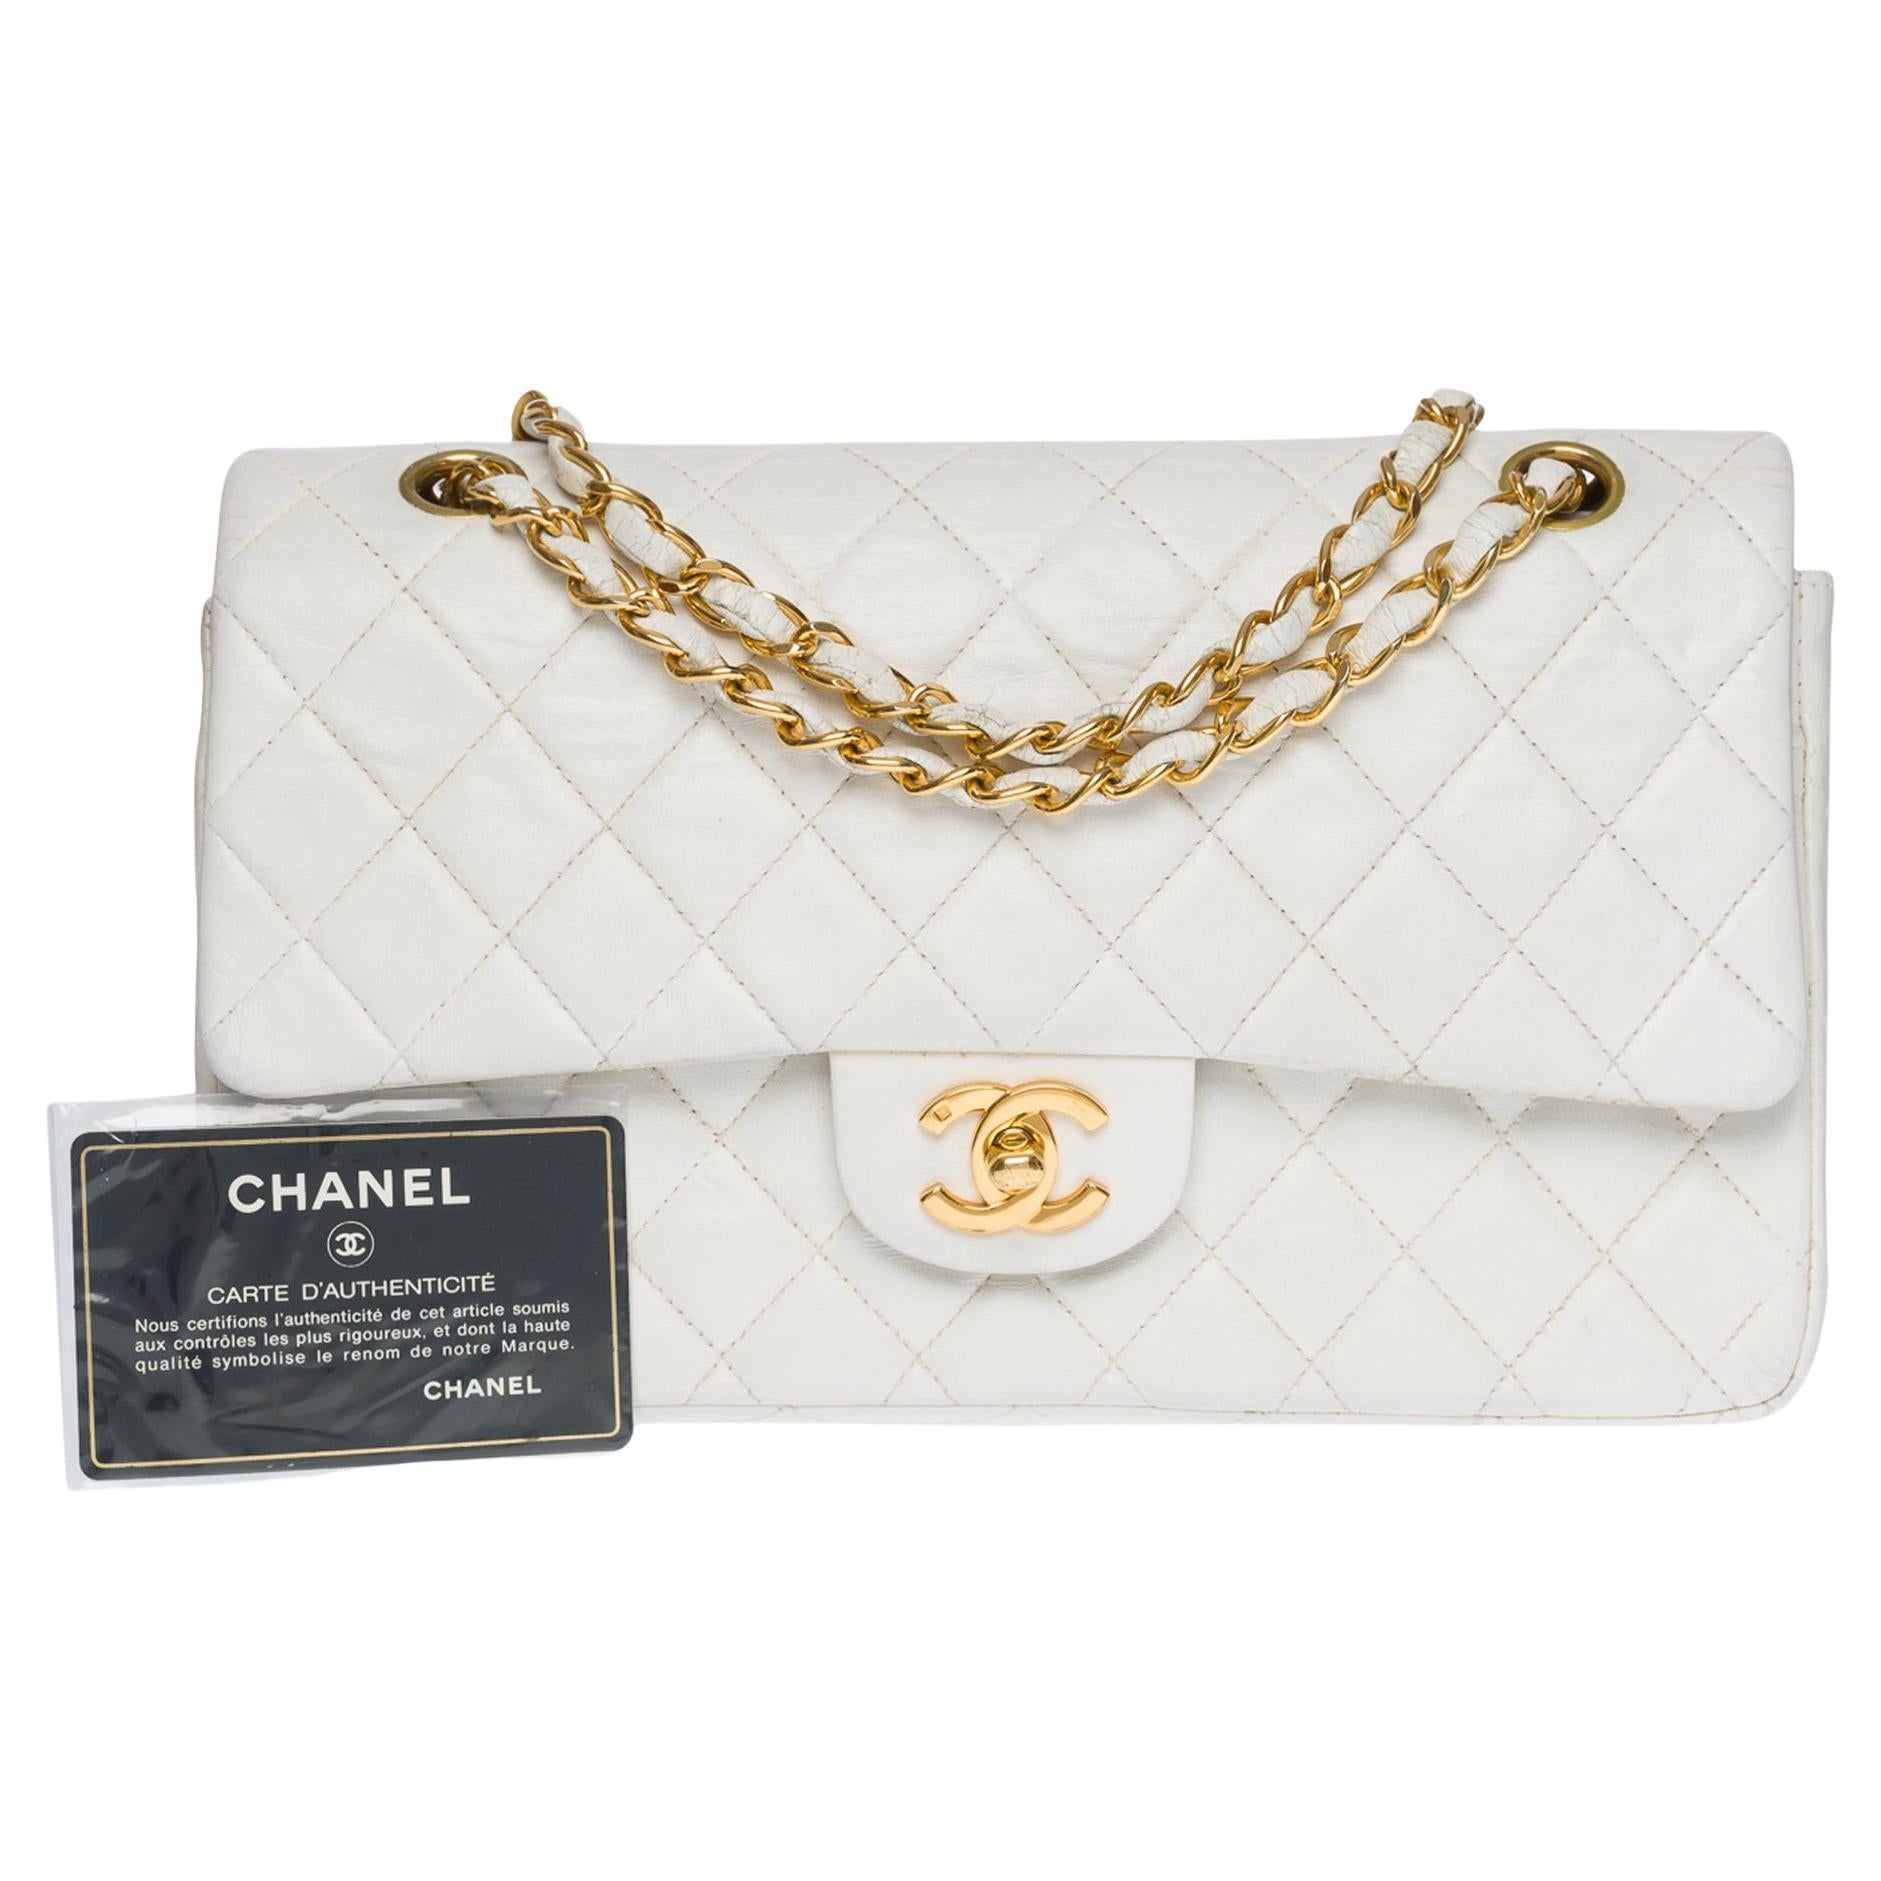 Chanel Timeless Medium double flap Shoulder bag in White quilted